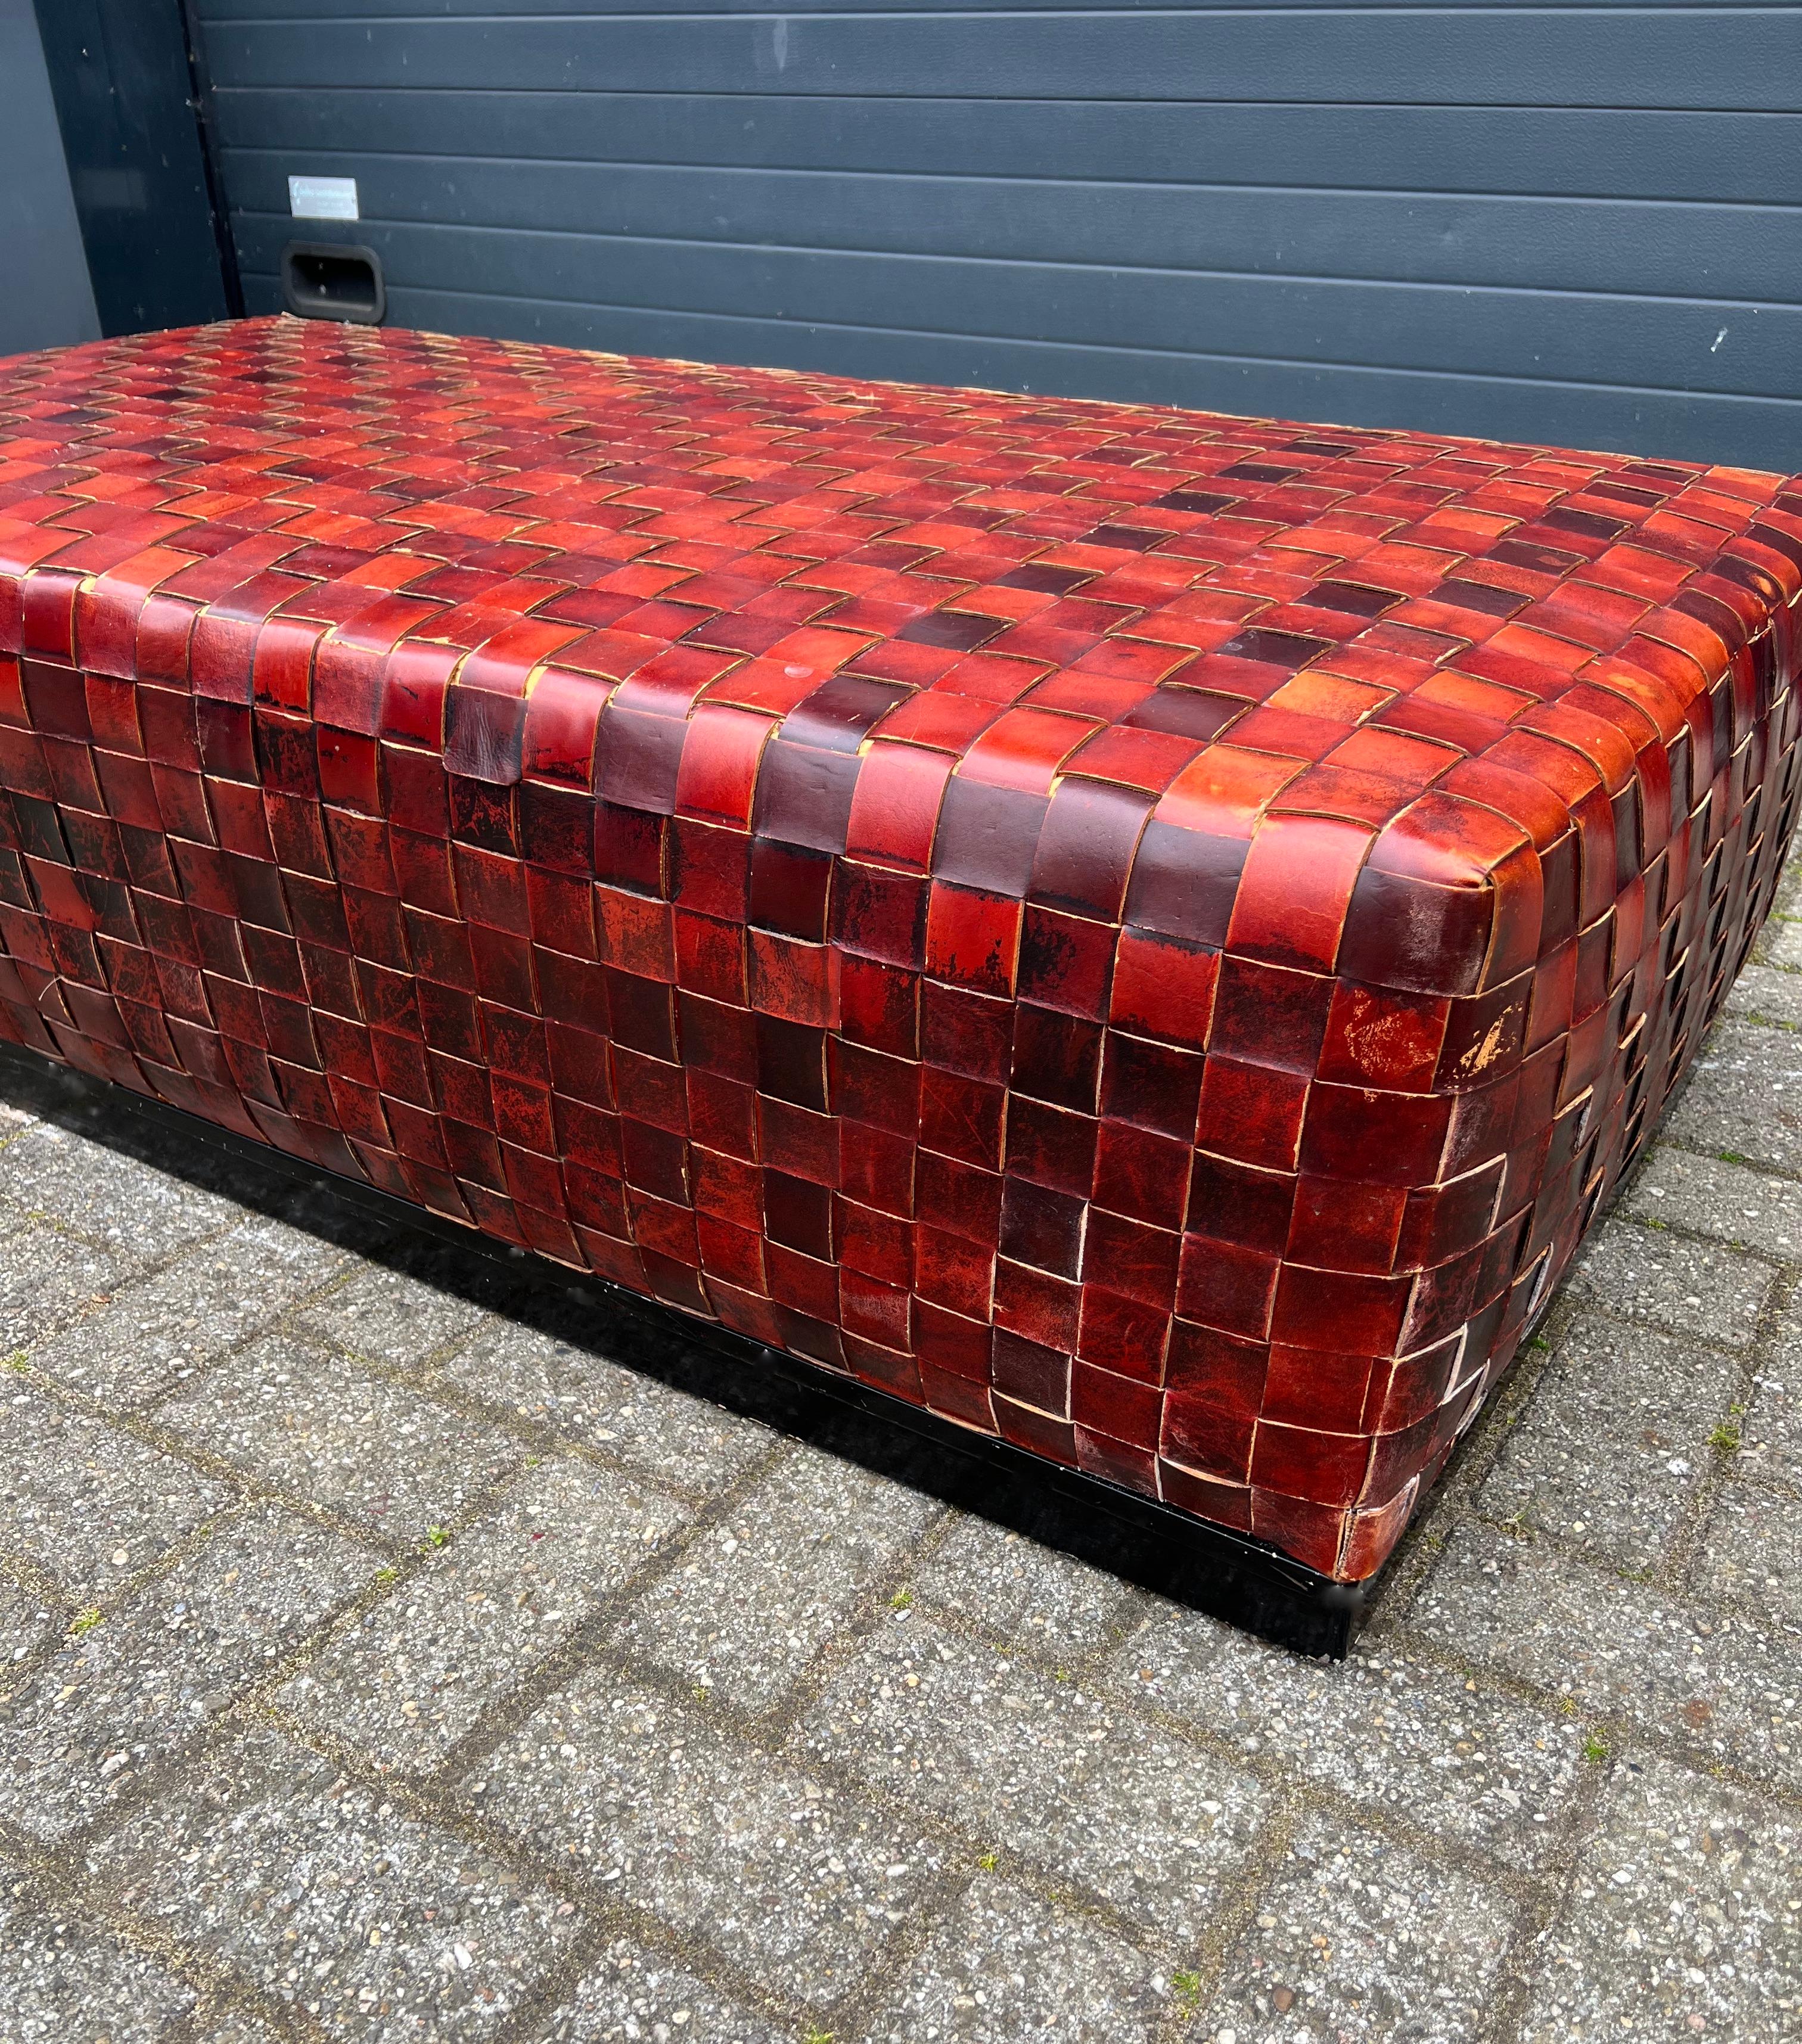 Timeless and stylish ottoman with top quality leather woven rails.

This finest quality and very large ottoman is another one of our recent great finds for interior designers and private collectors of stylish pieces alike. It will look great as a